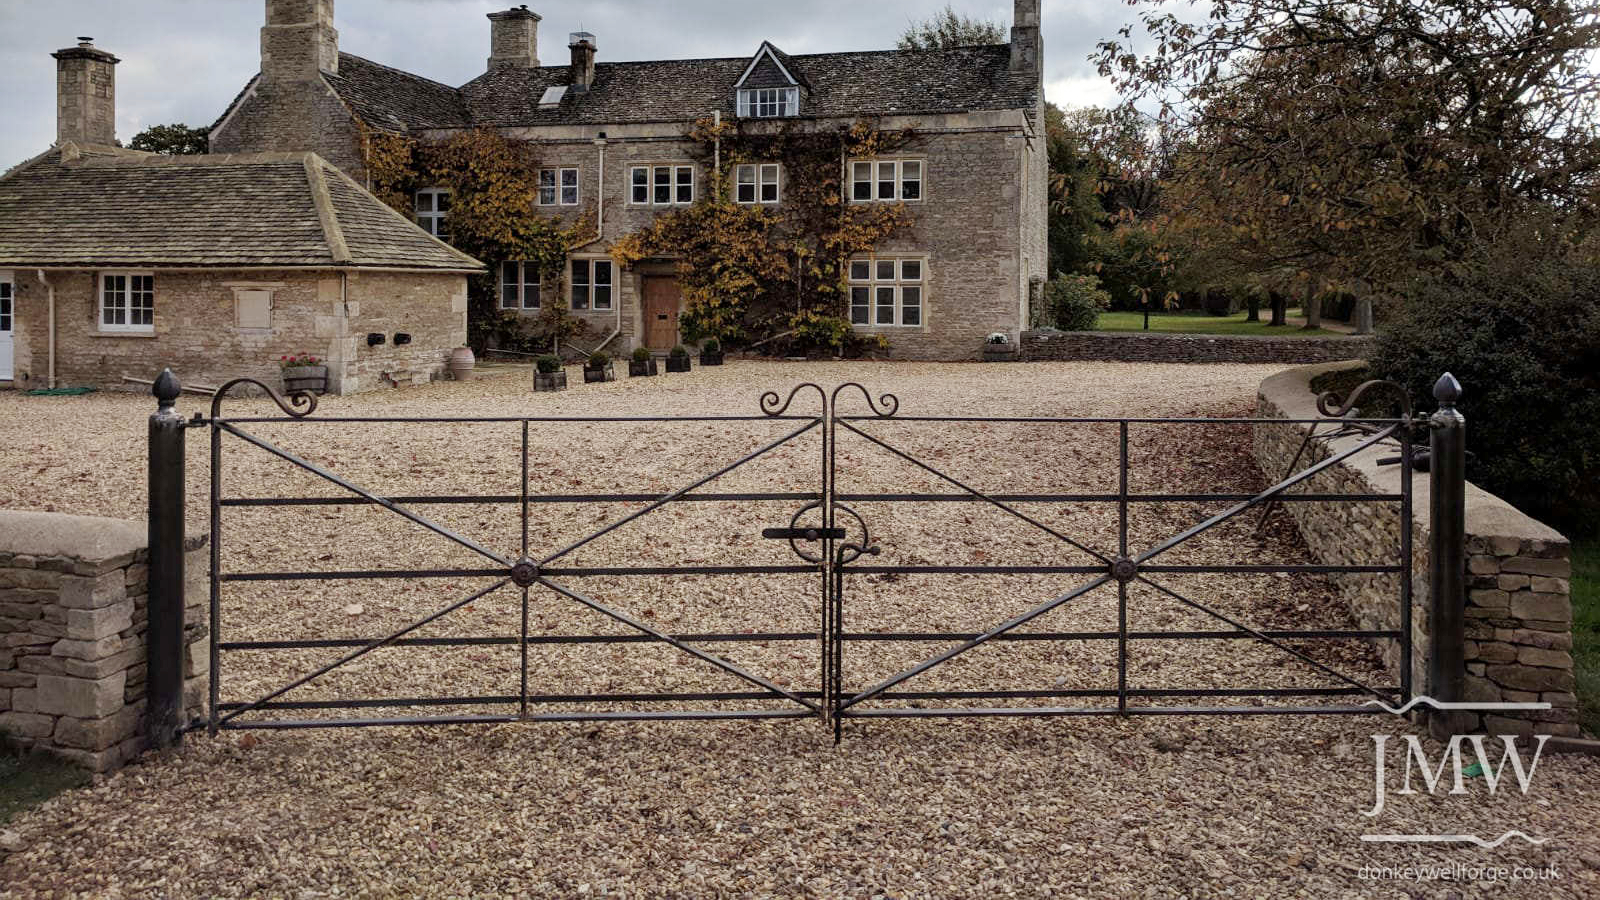 gate-country-house-cotswolds-donkeywell-forge